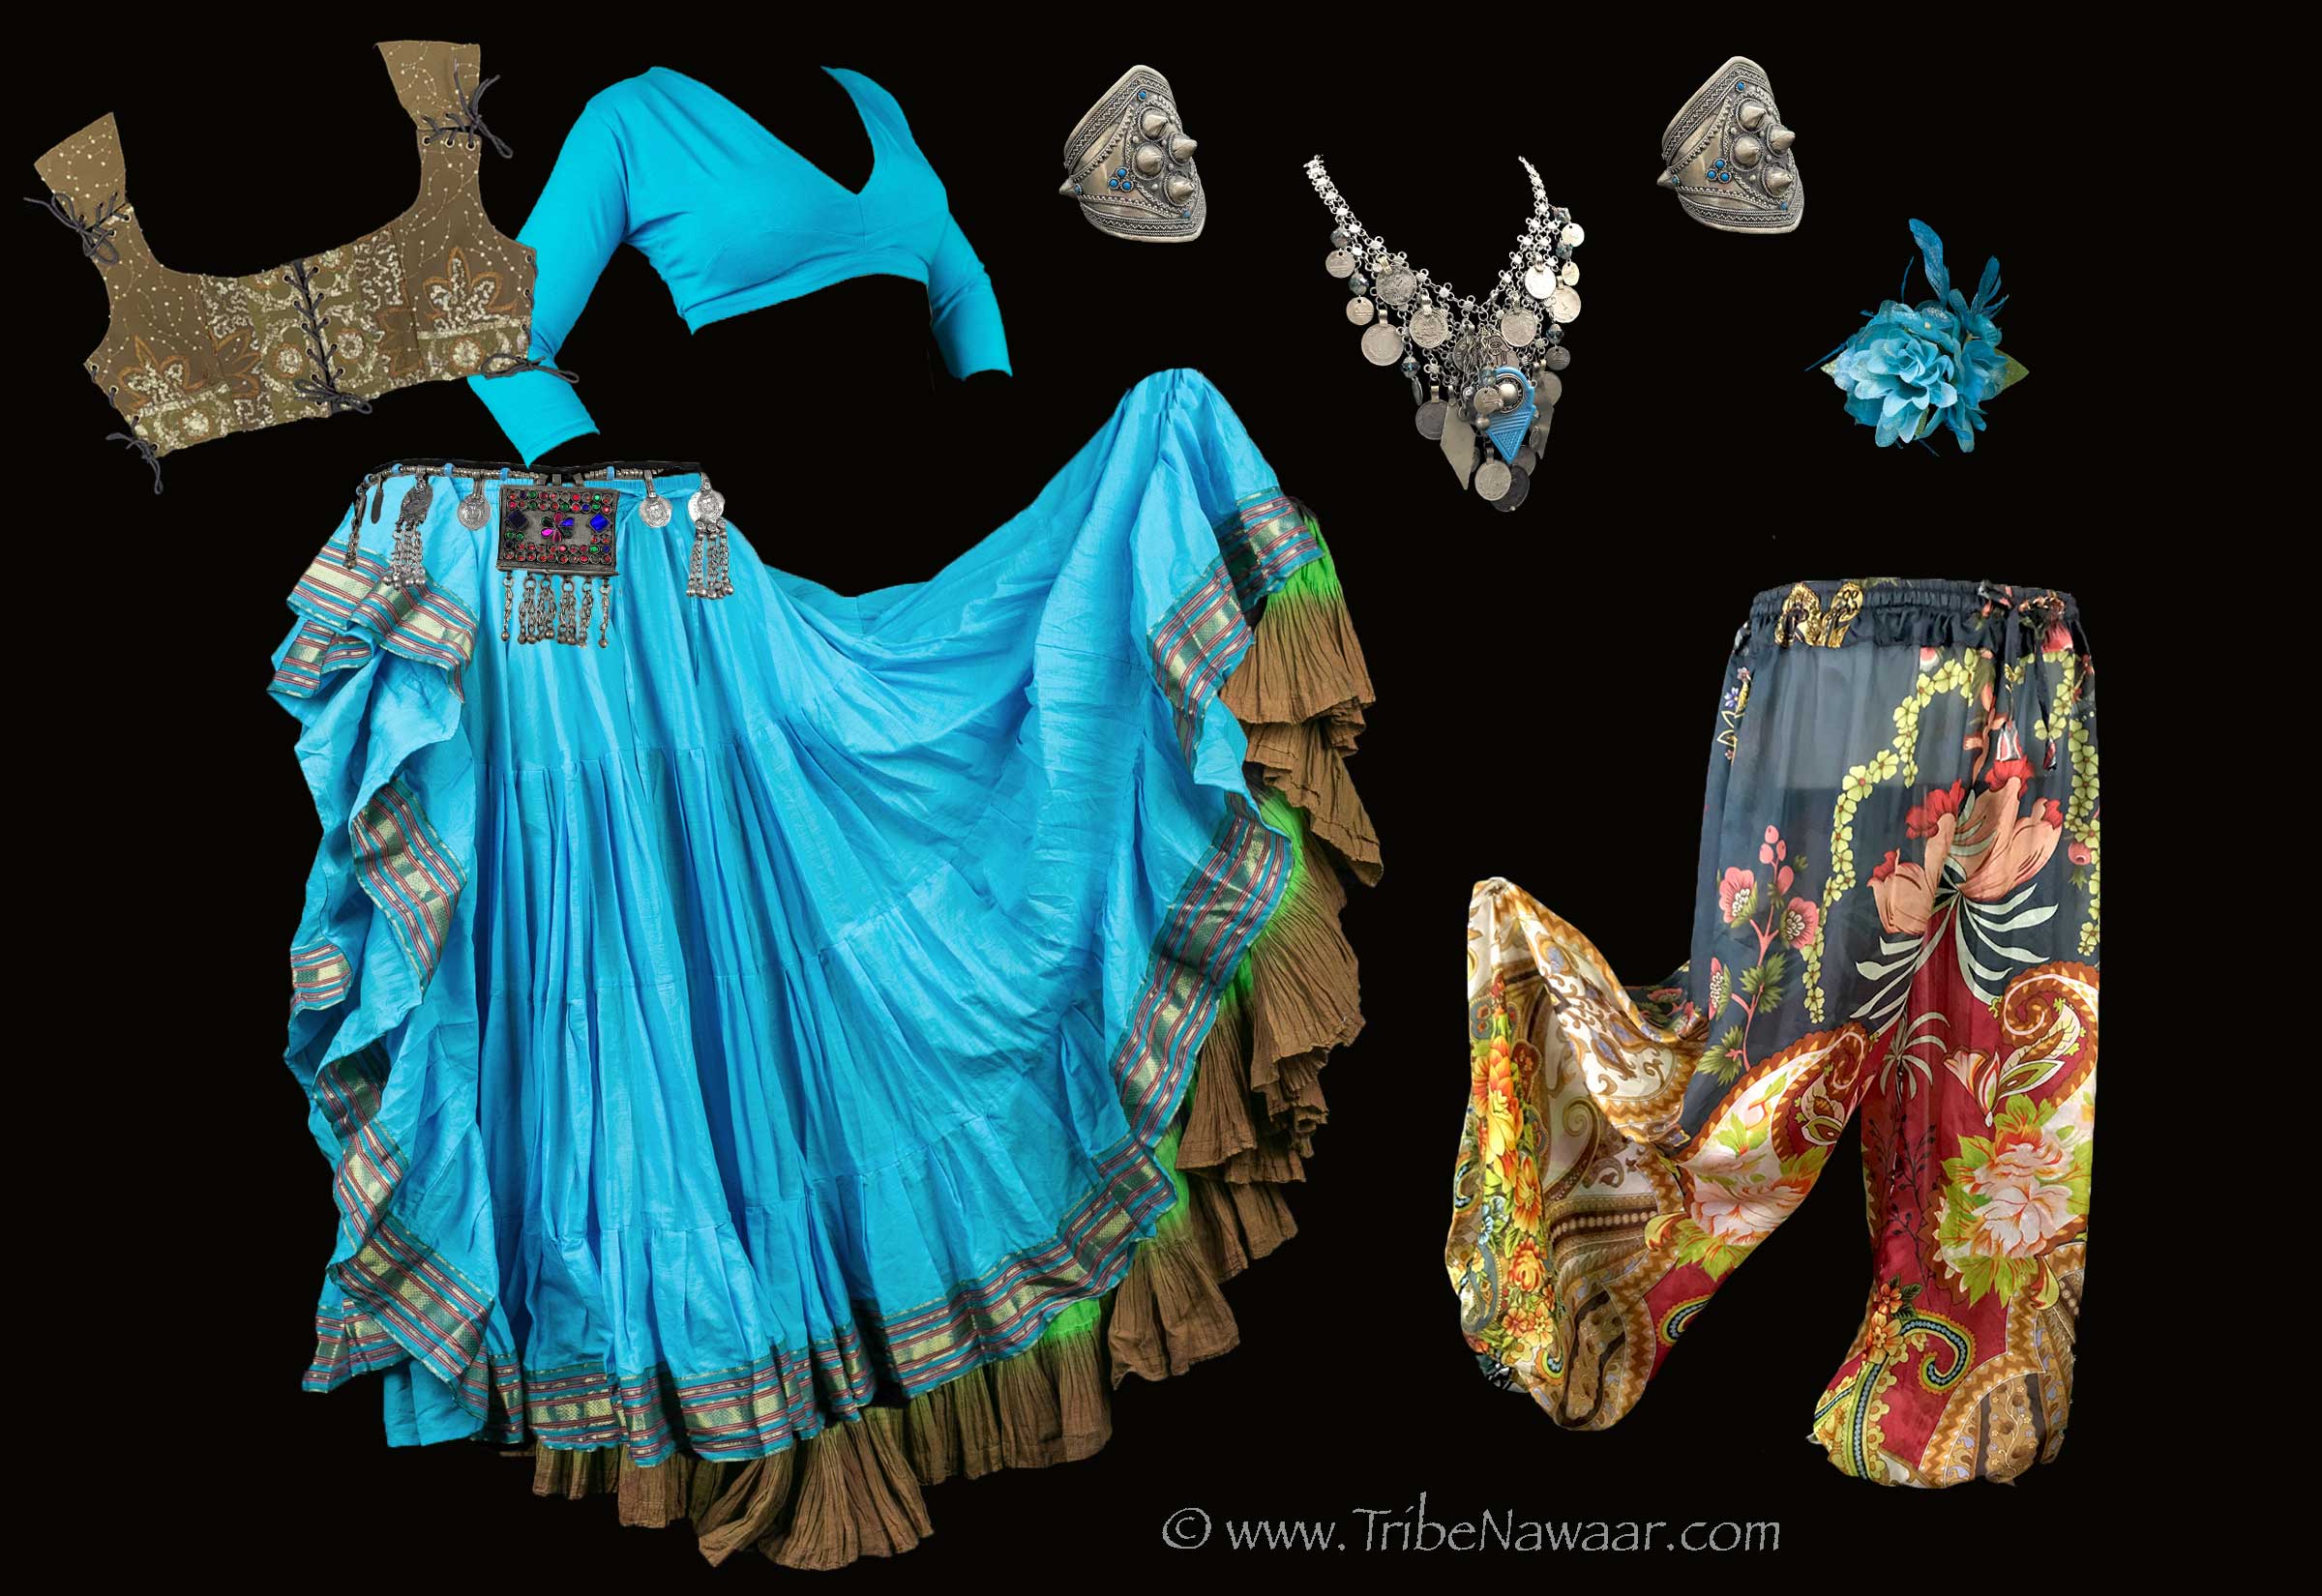 2021 winter costuming combo from The Nawaar Marketplace- all belly dance costuming and accessories available at www.TribeNawaar.com